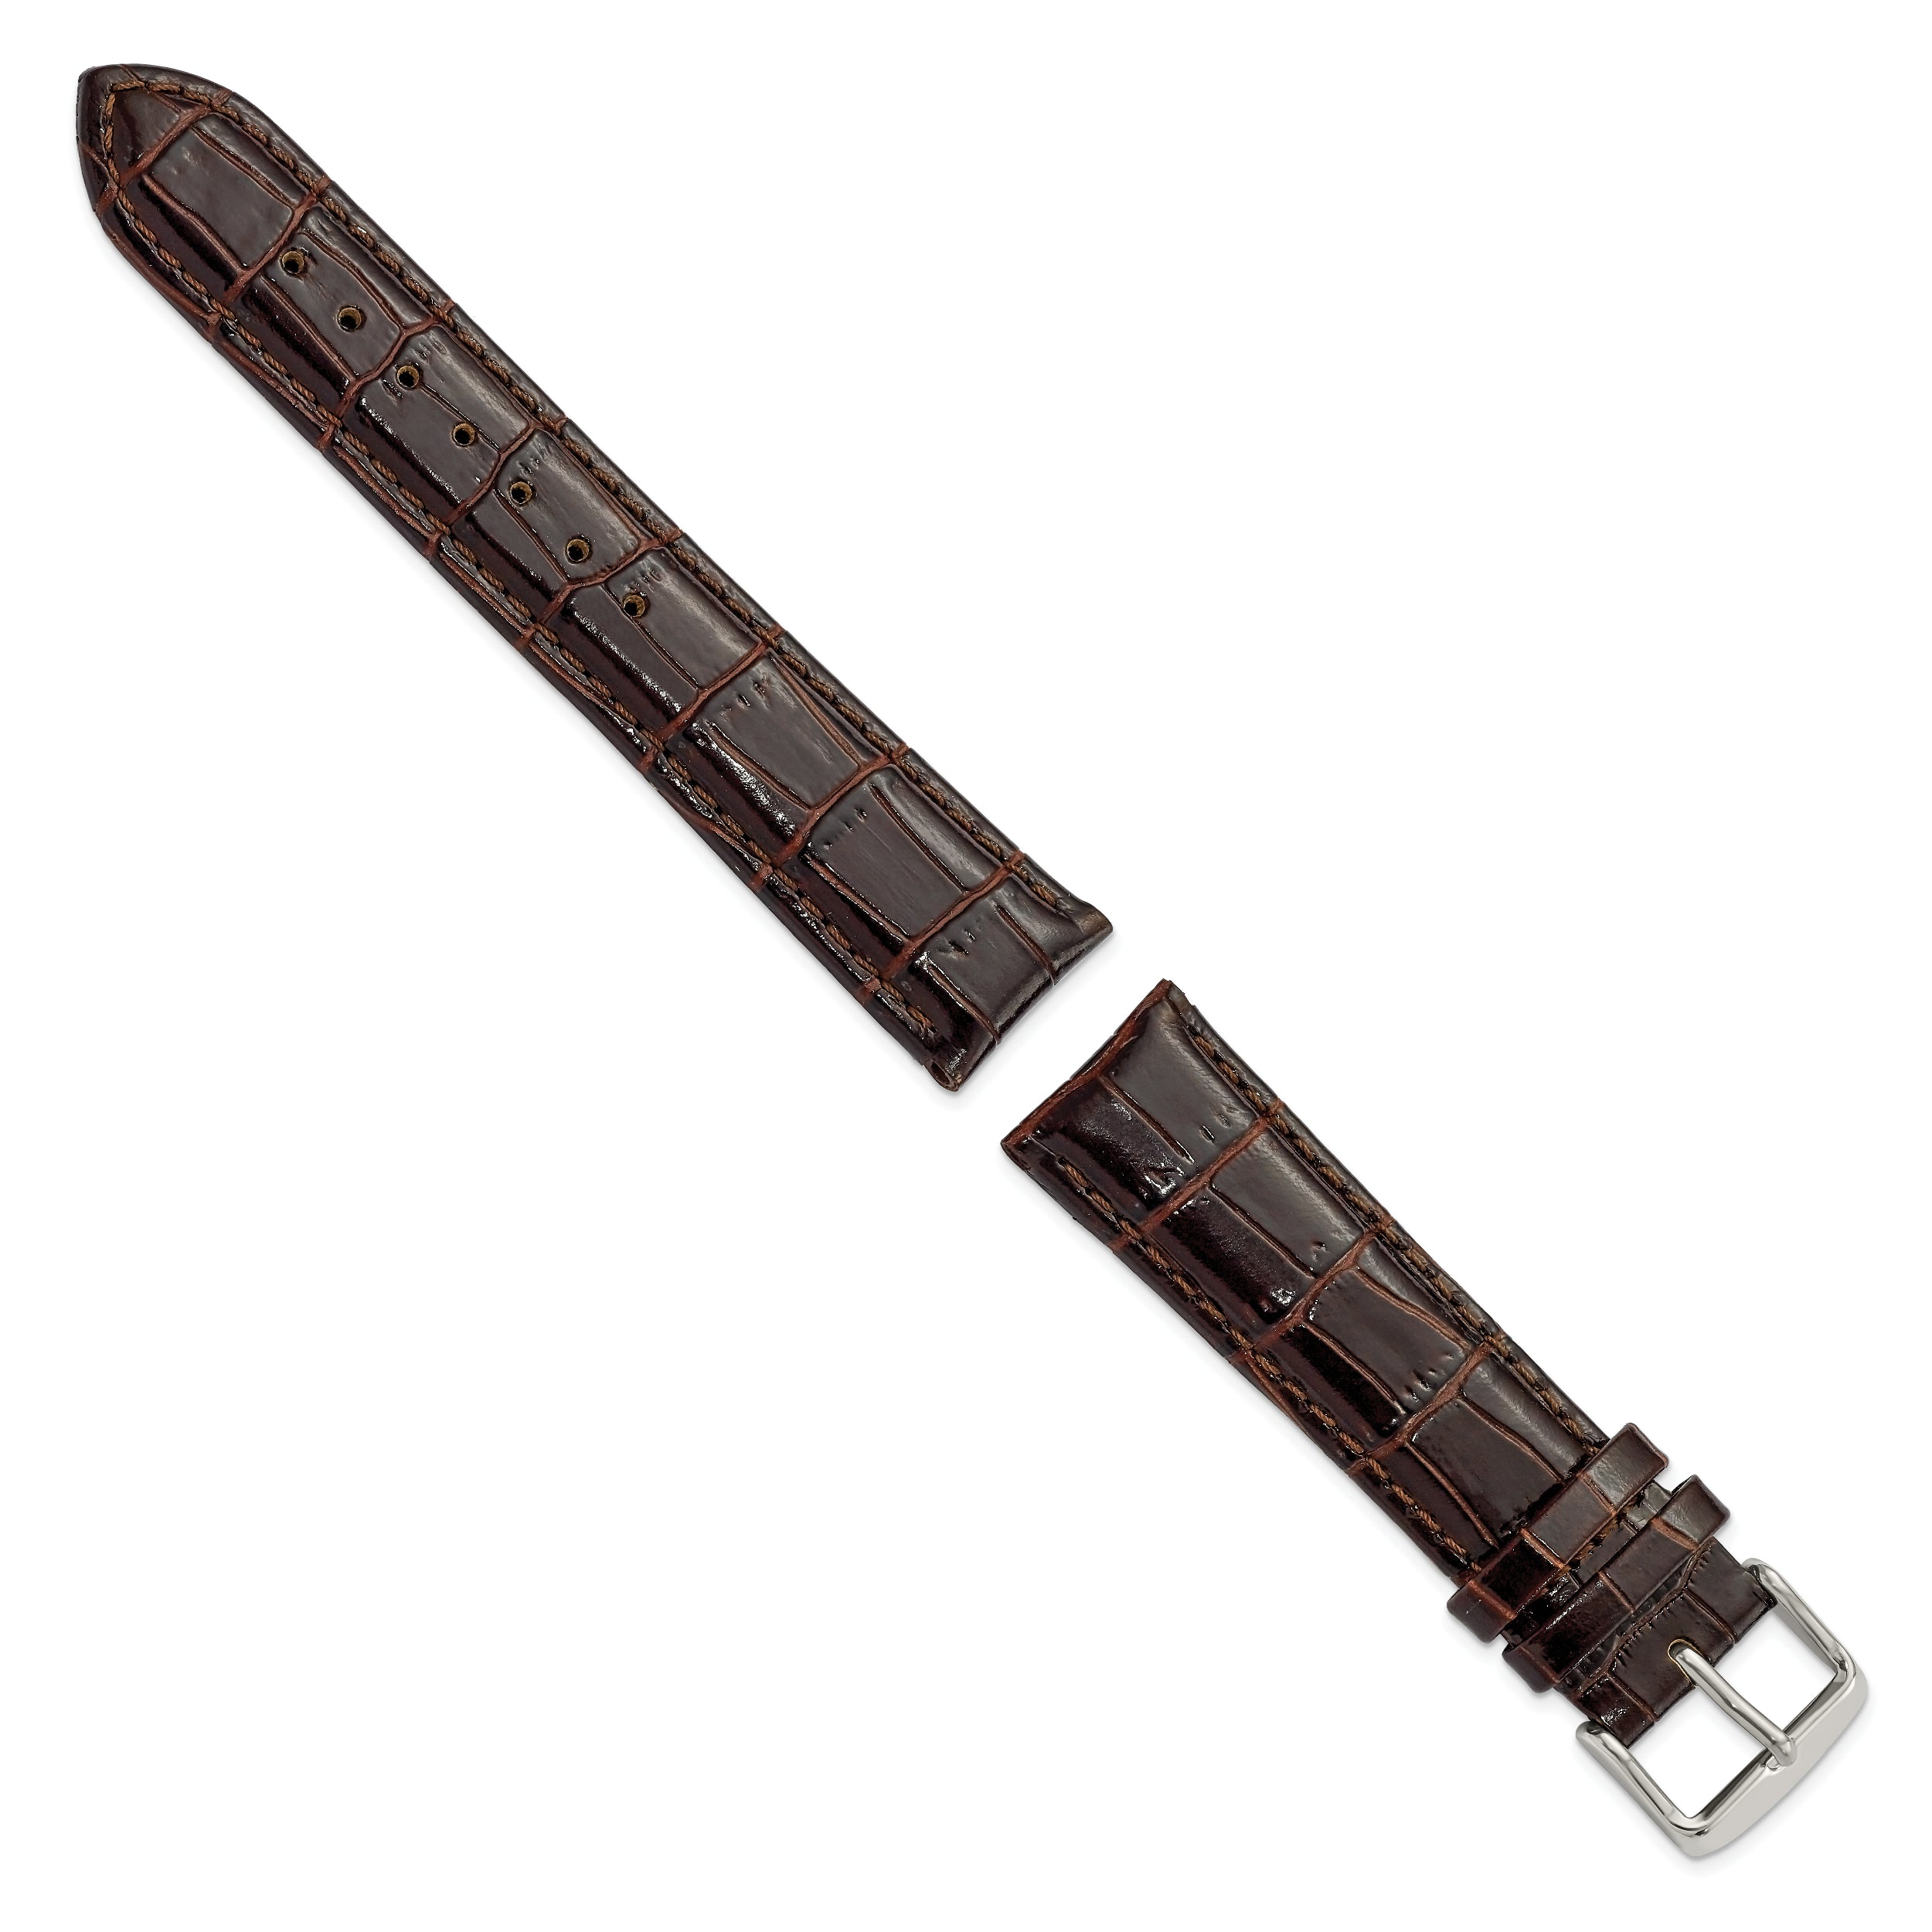 12mm Dark Brown Crocodile Grain Chronograph Leather with Silver-tone Buckle 6.75 inch Watch Band